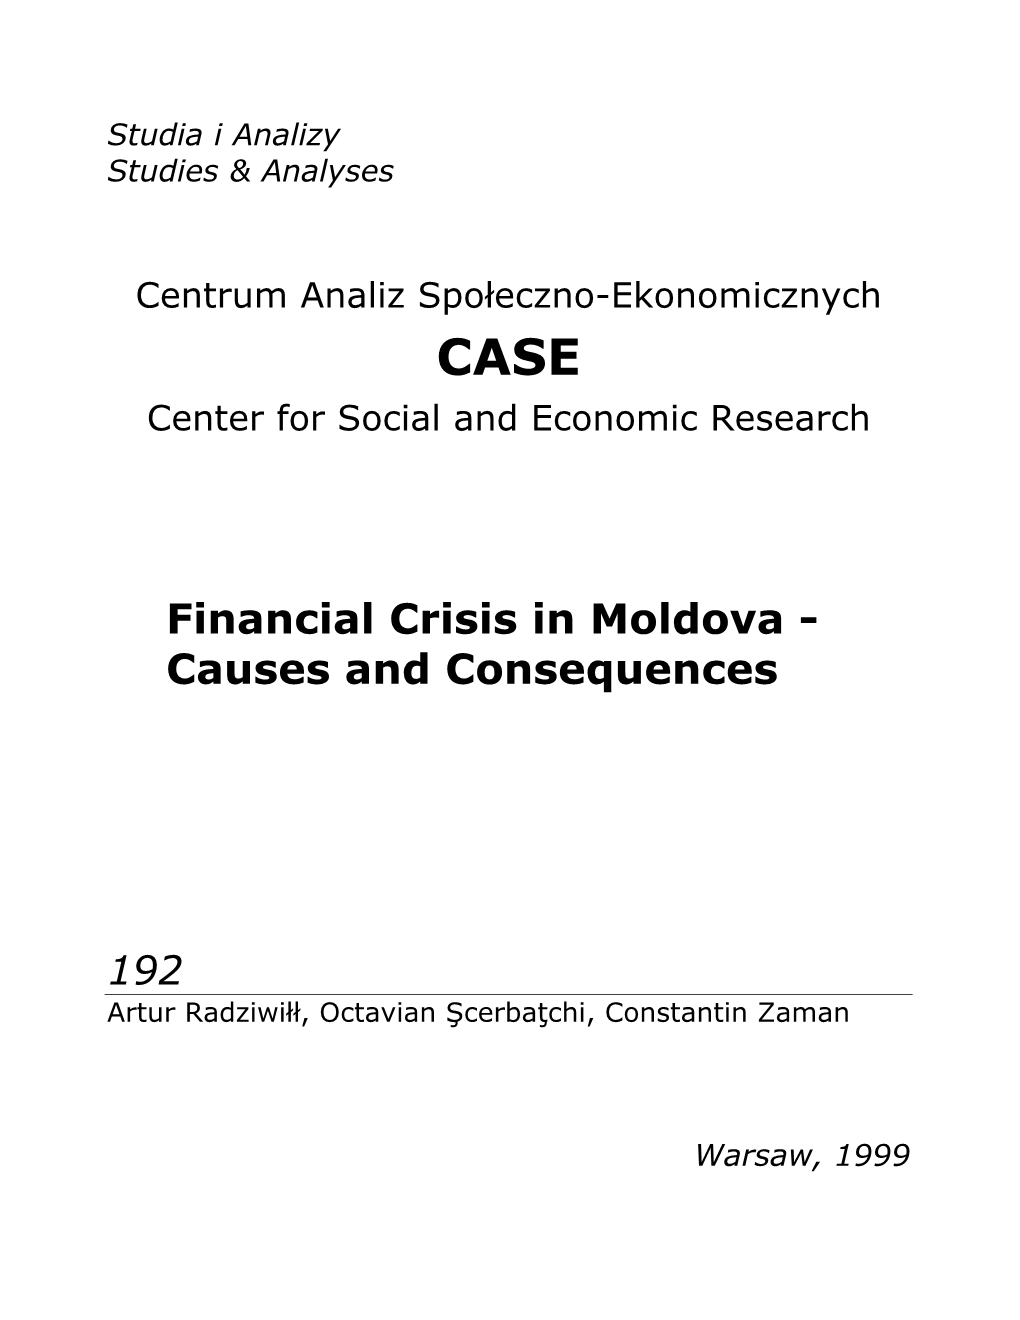 Financial Crisis in Moldova - Causes and Consequences